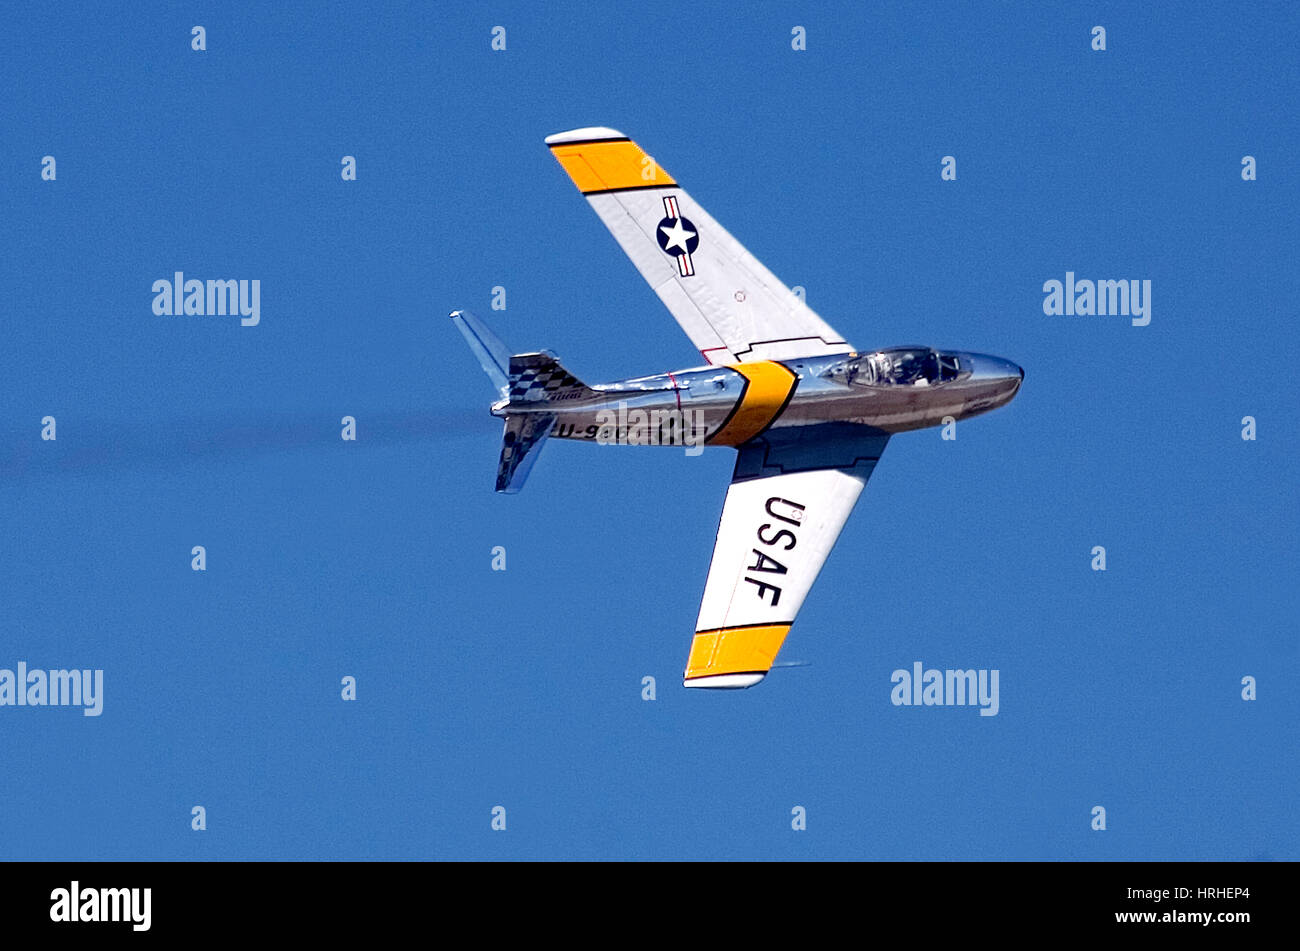 North American F-86 Sabre swept wing jet of the Korean War flying at an air show Stock Photo